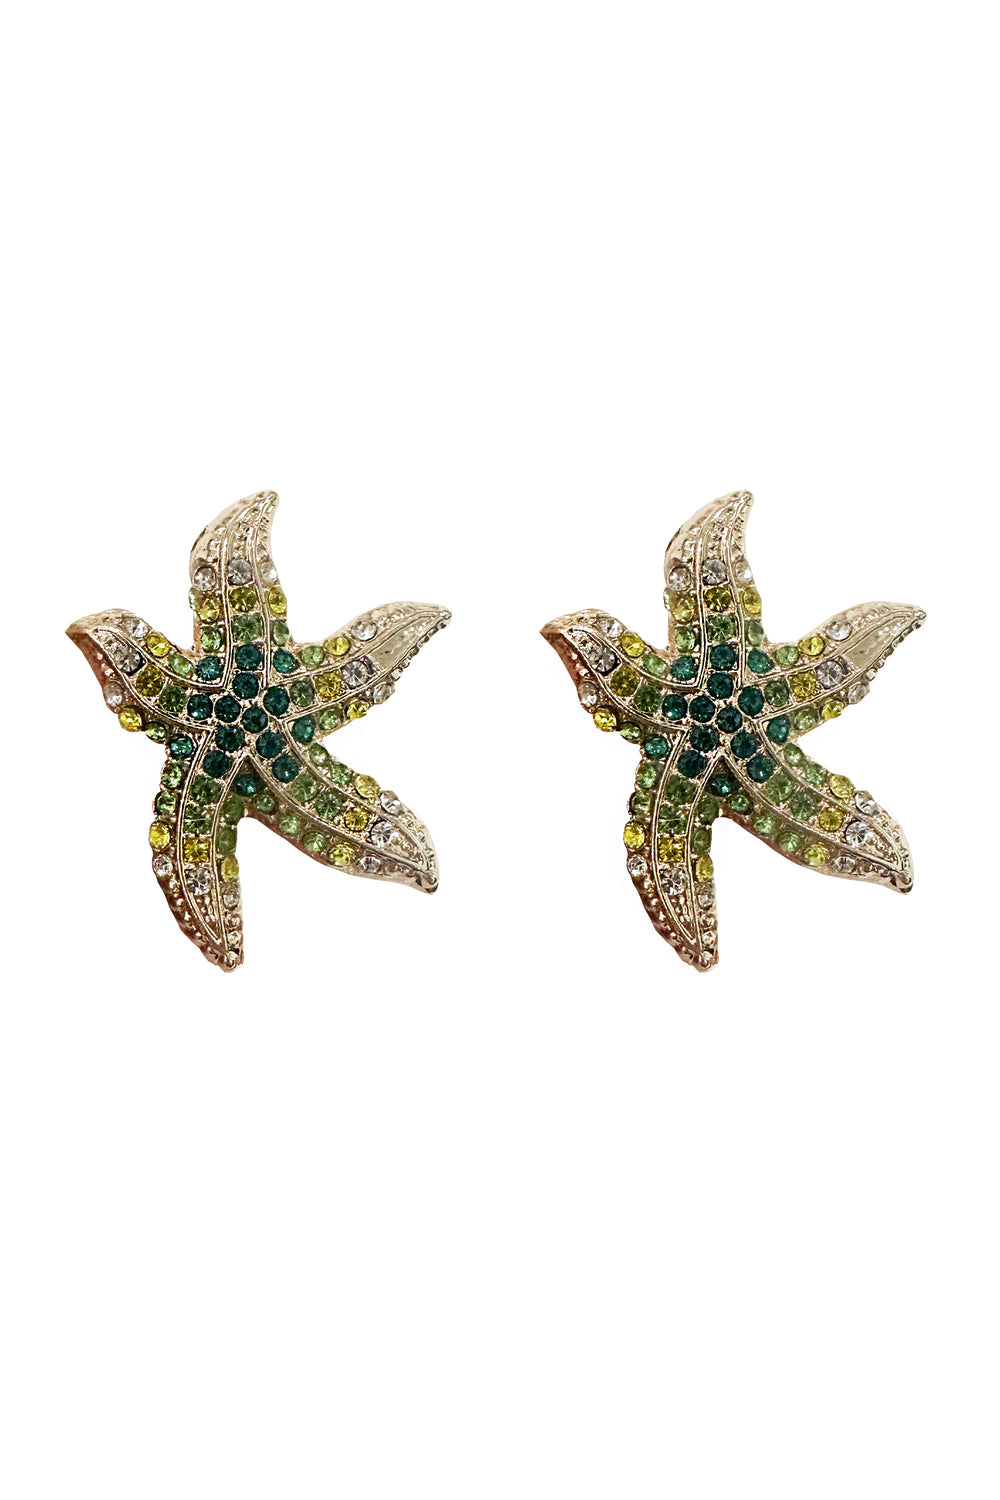 Blue, green and yellow diamante-encrusted starfish earrings adorned with lustrous pearls, combining elegance and glamour for a captivating accessory.